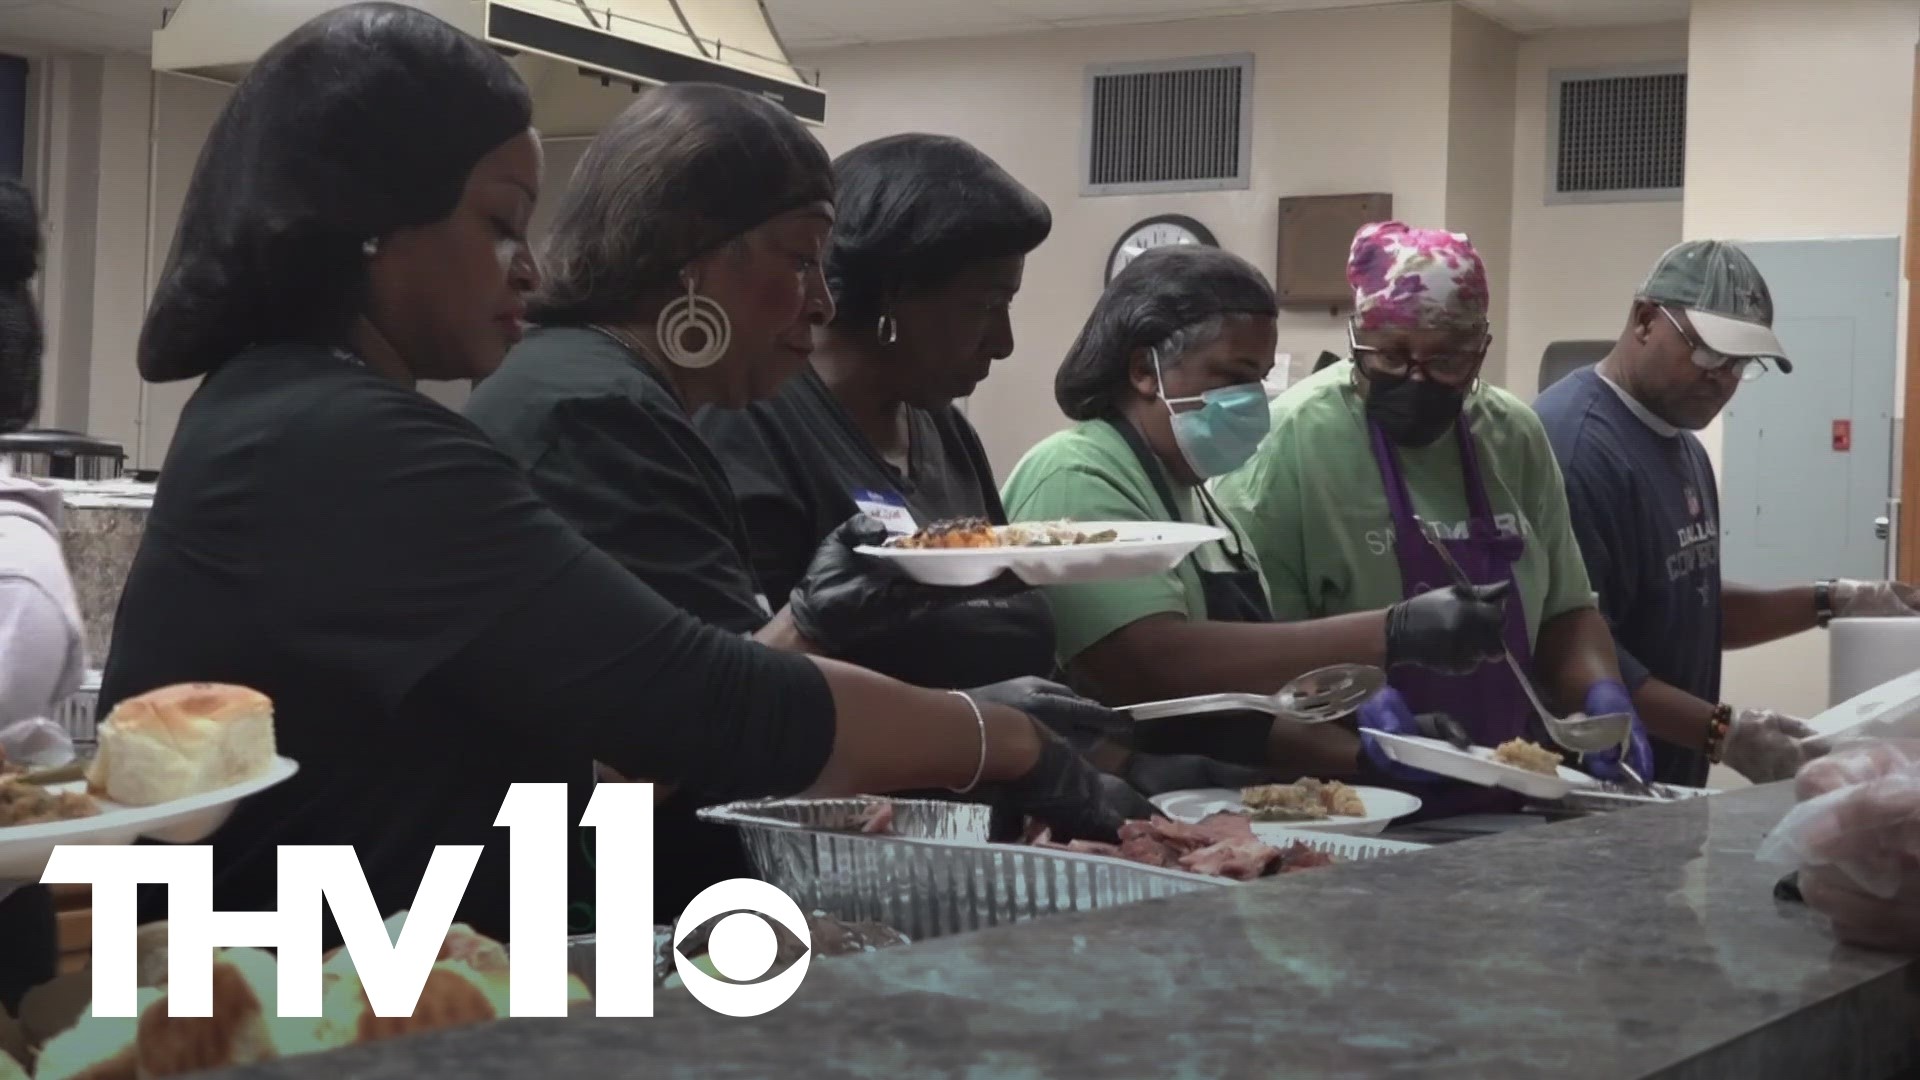 One of the biggest churches in Little Rock is spreading joy this holiday season, giving back to their community through the gift of food and much more.